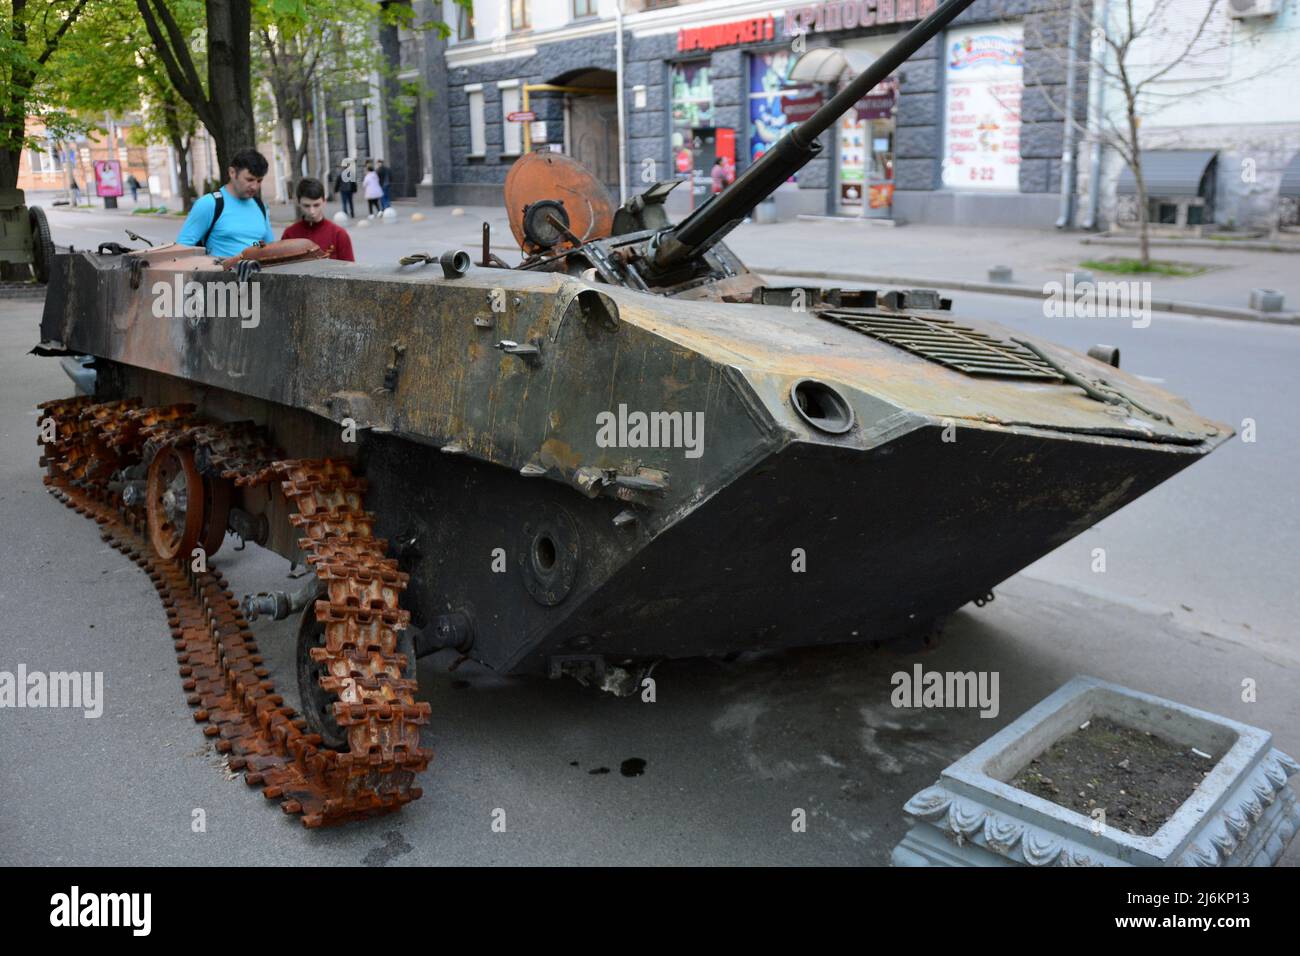 Kyiv region, Ukraine - 02 May 2022, The destroyed Russian tank parked on the roadside, it was destroyed by the Ukrainian military in the Kiev region. Russia invaded Ukraine on 24 February 2022, triggering the largest military attack in Europe since World War II. Stock Photo